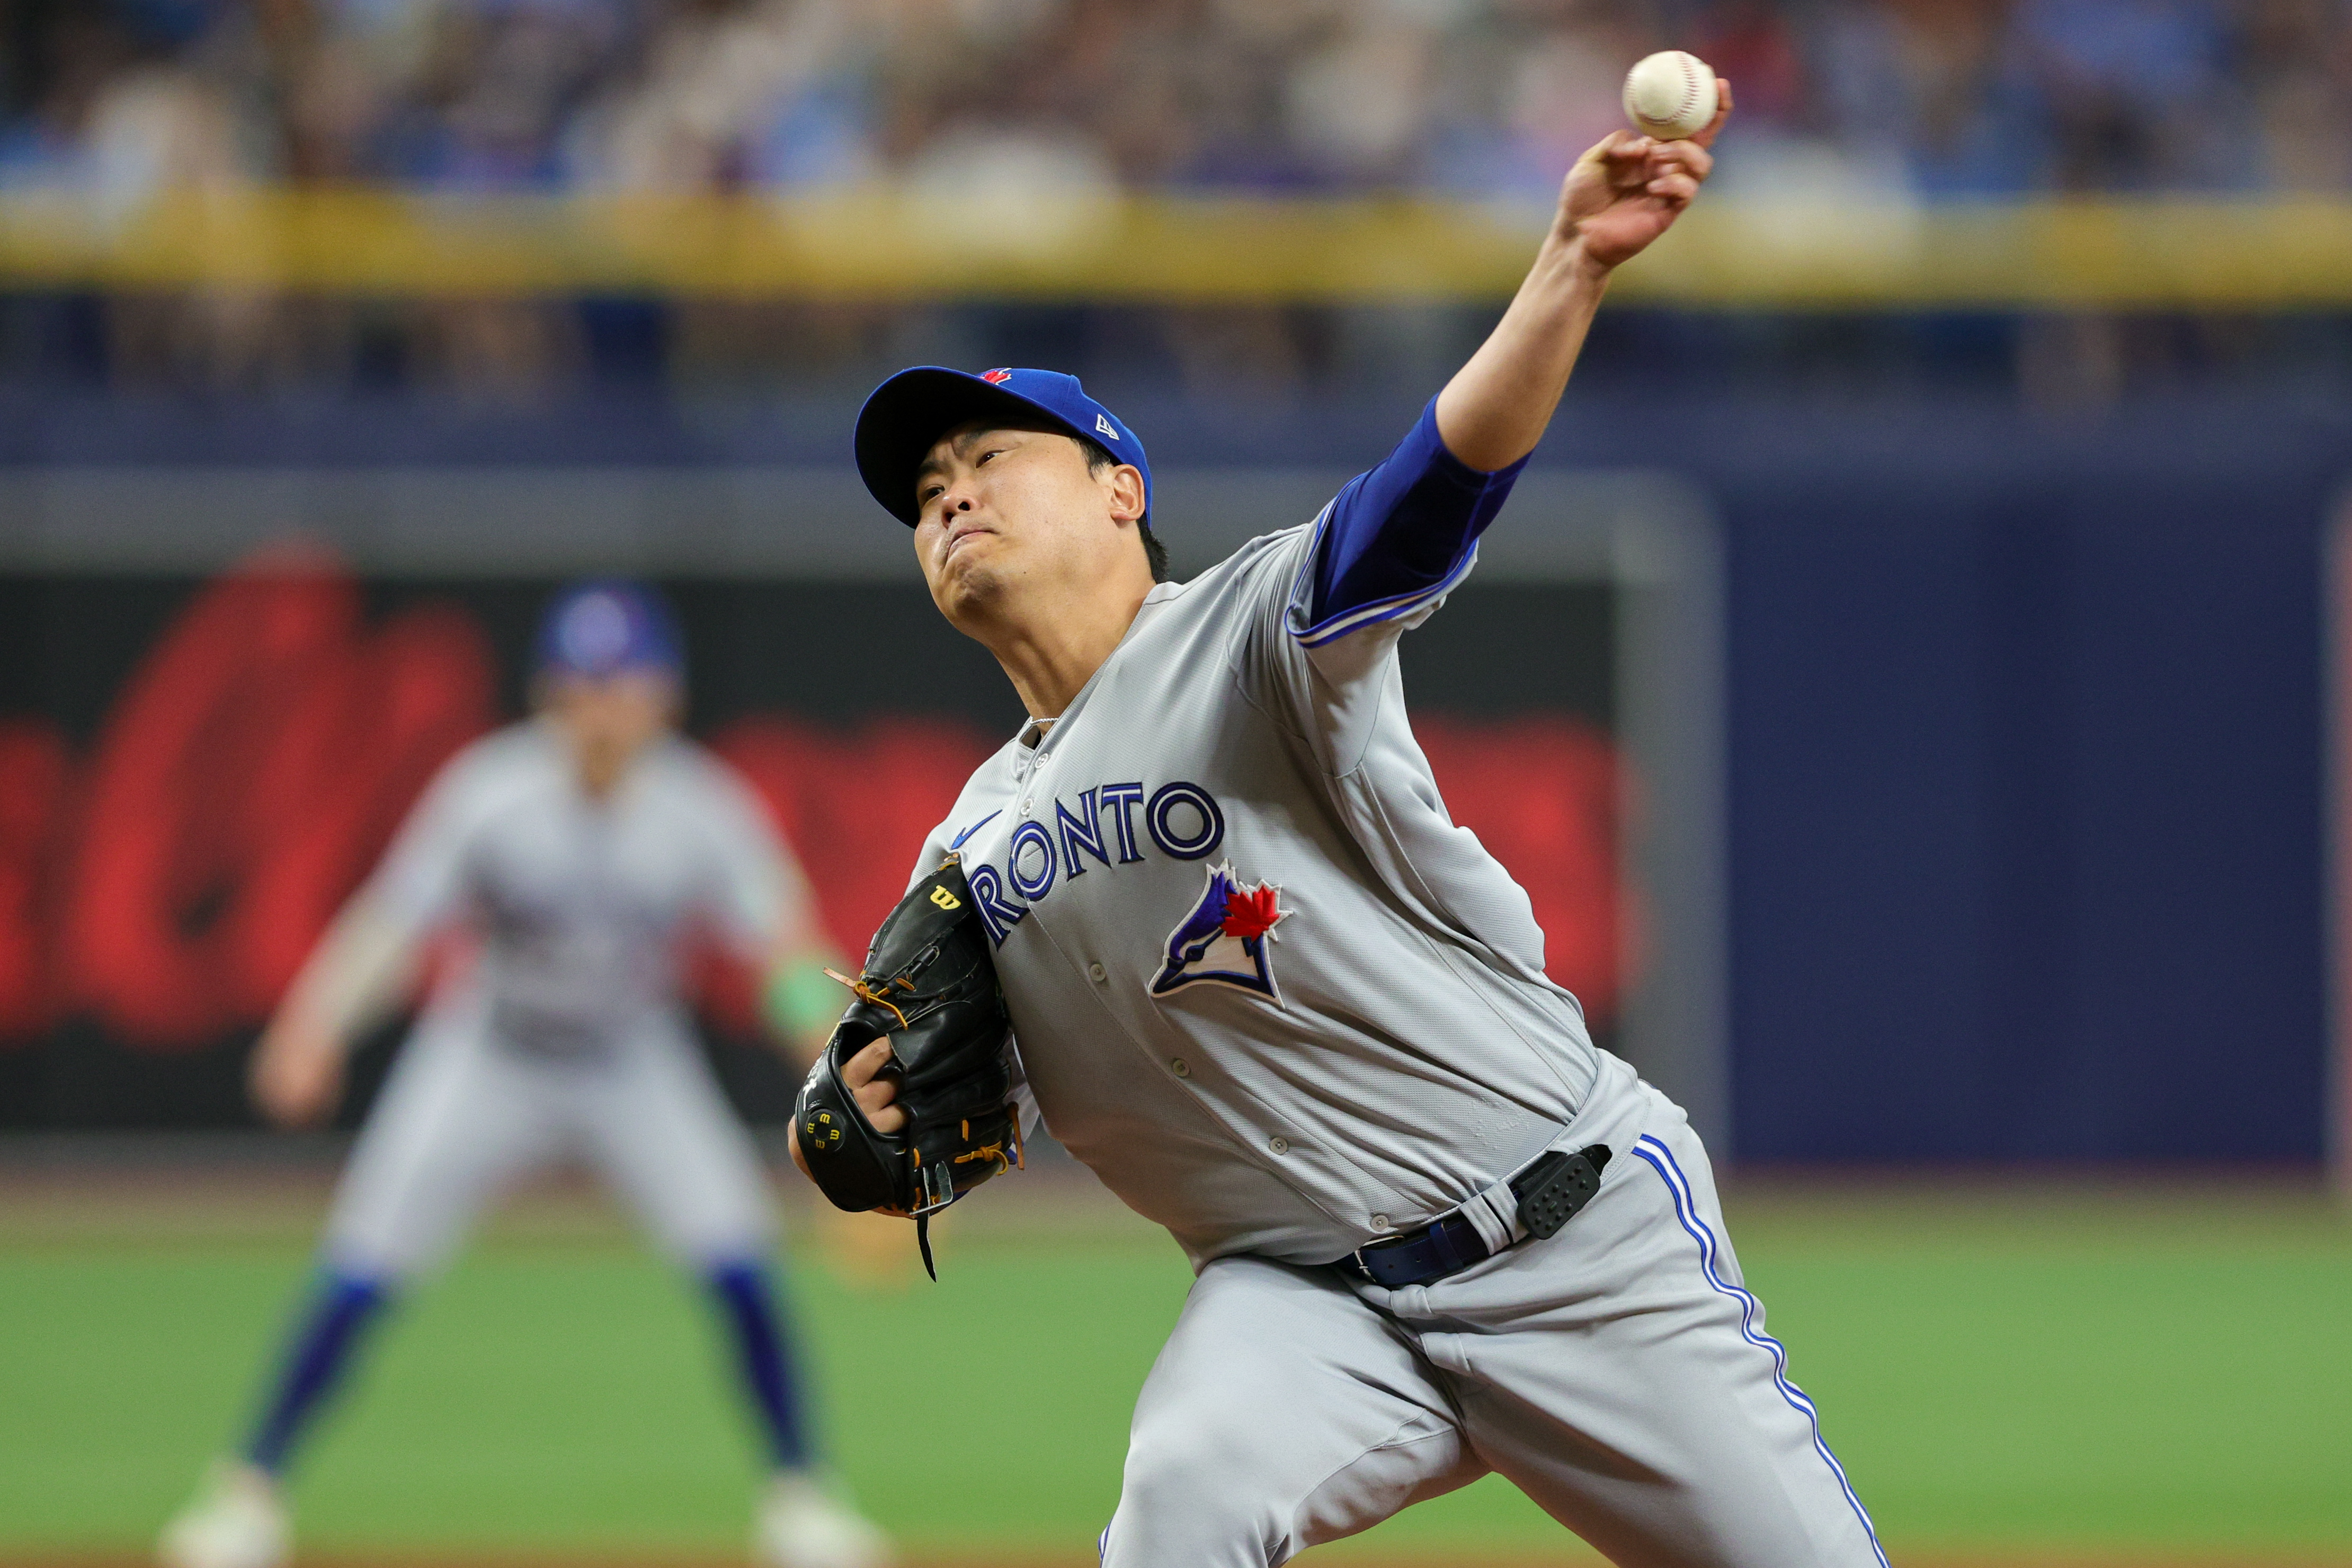 Toronto Blue Jays starting pitcher Hyun Jin Ryu throws a pitch against the Tampa Bay Rays in the third inning at Tropicana Field.